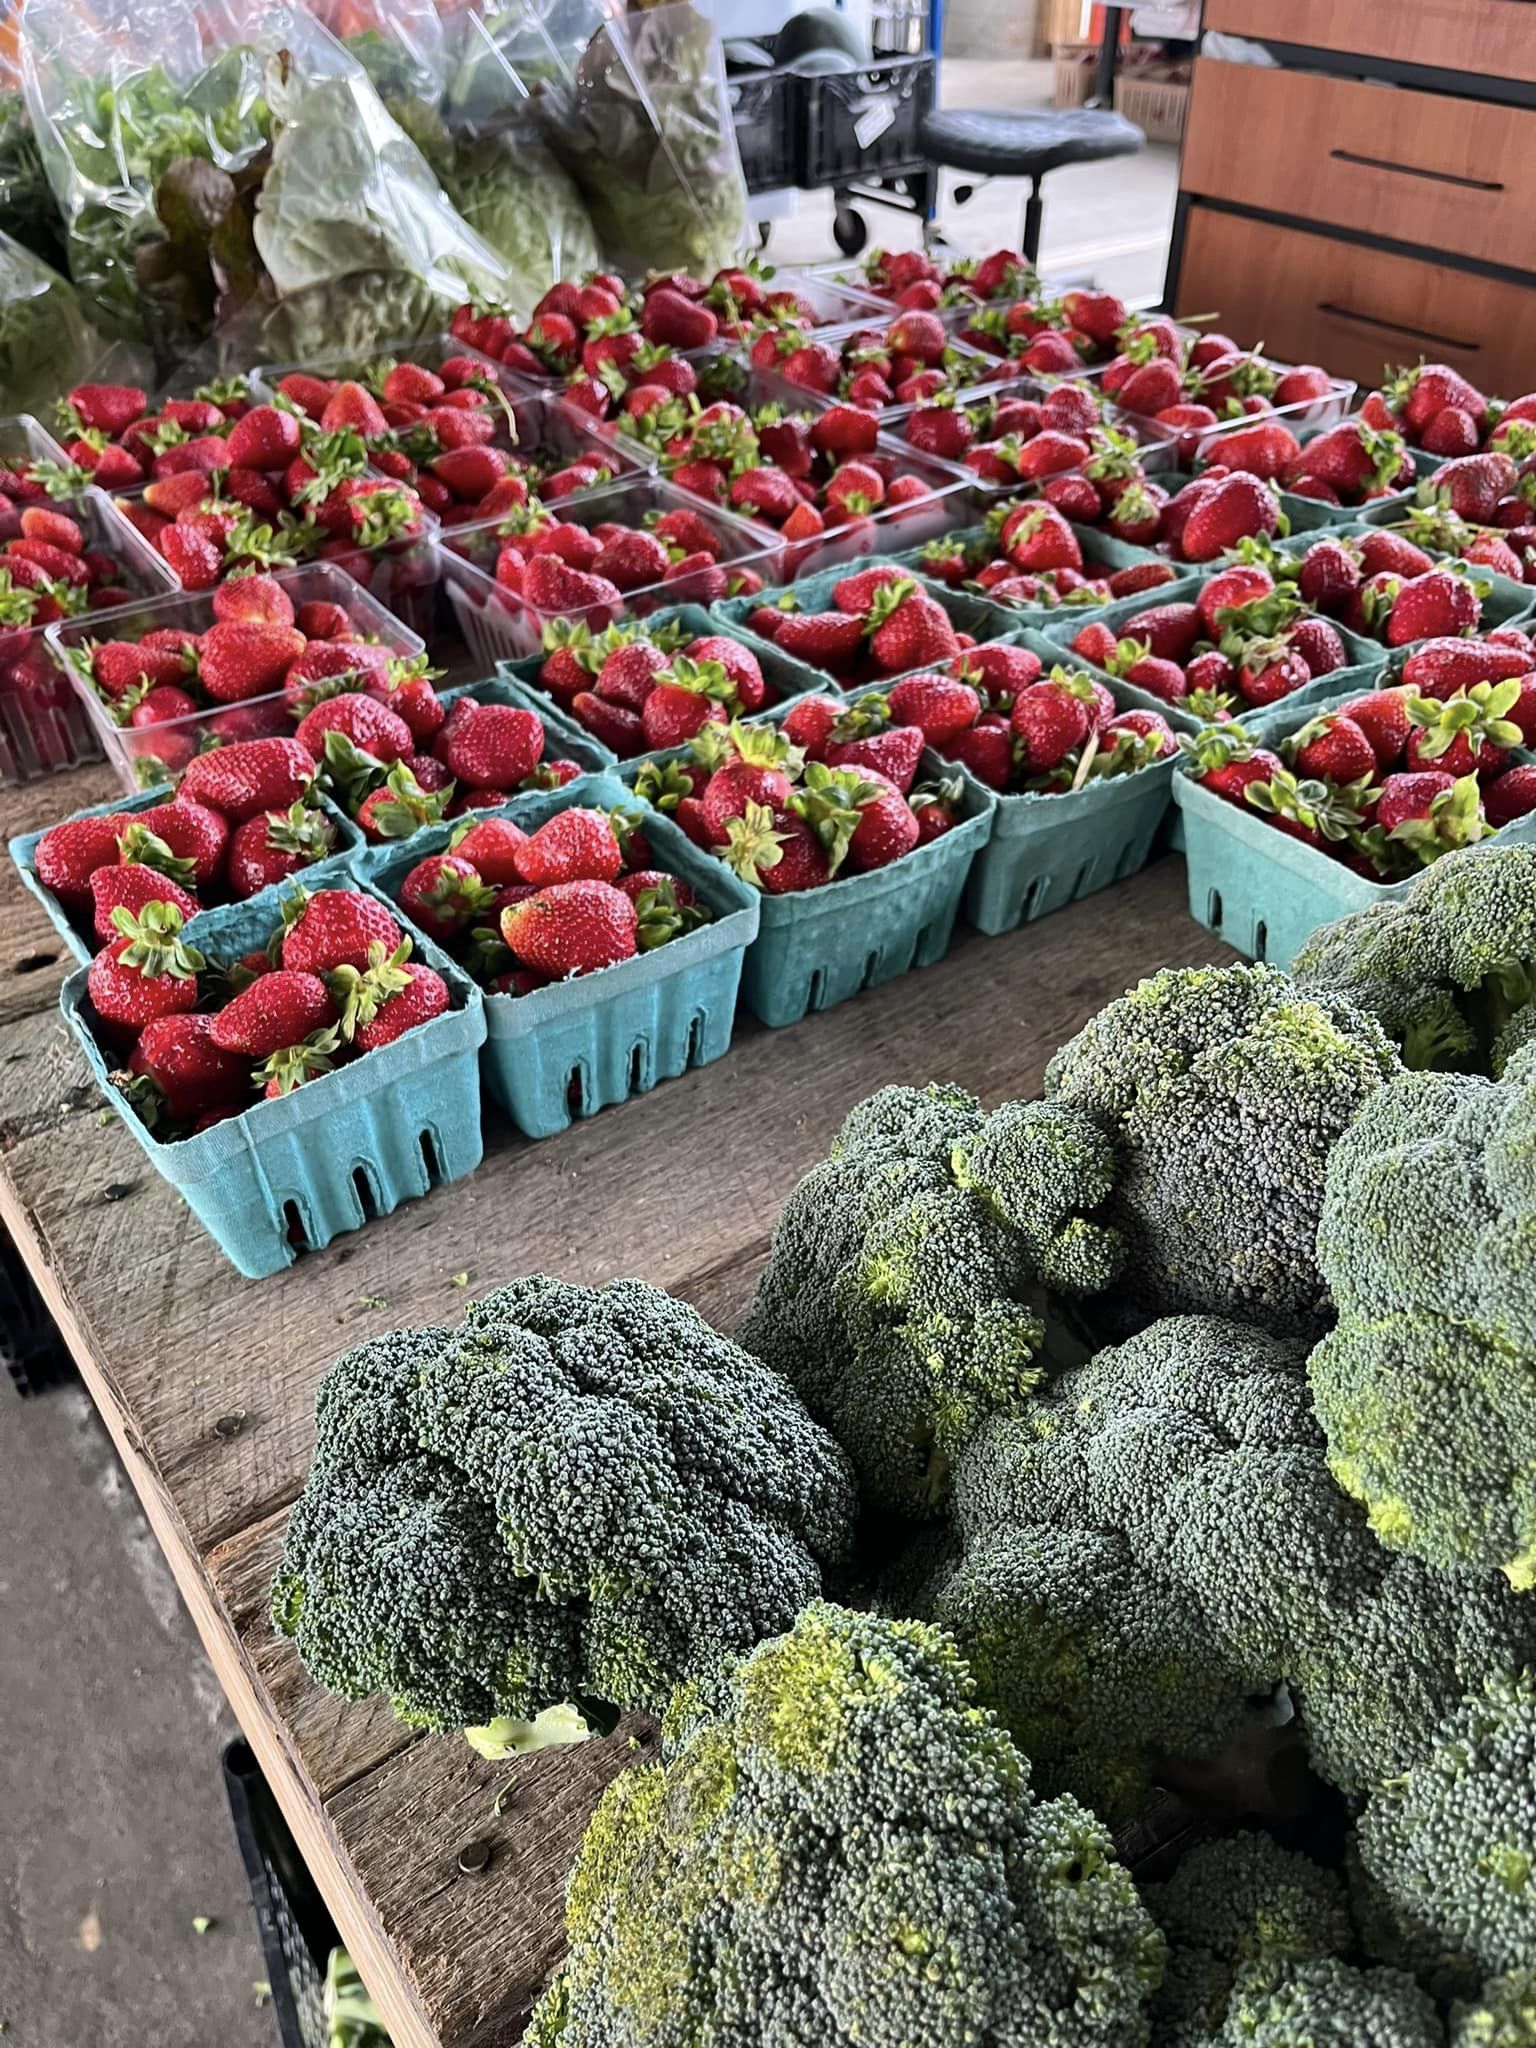 strawberries and broccoli for sale at a market